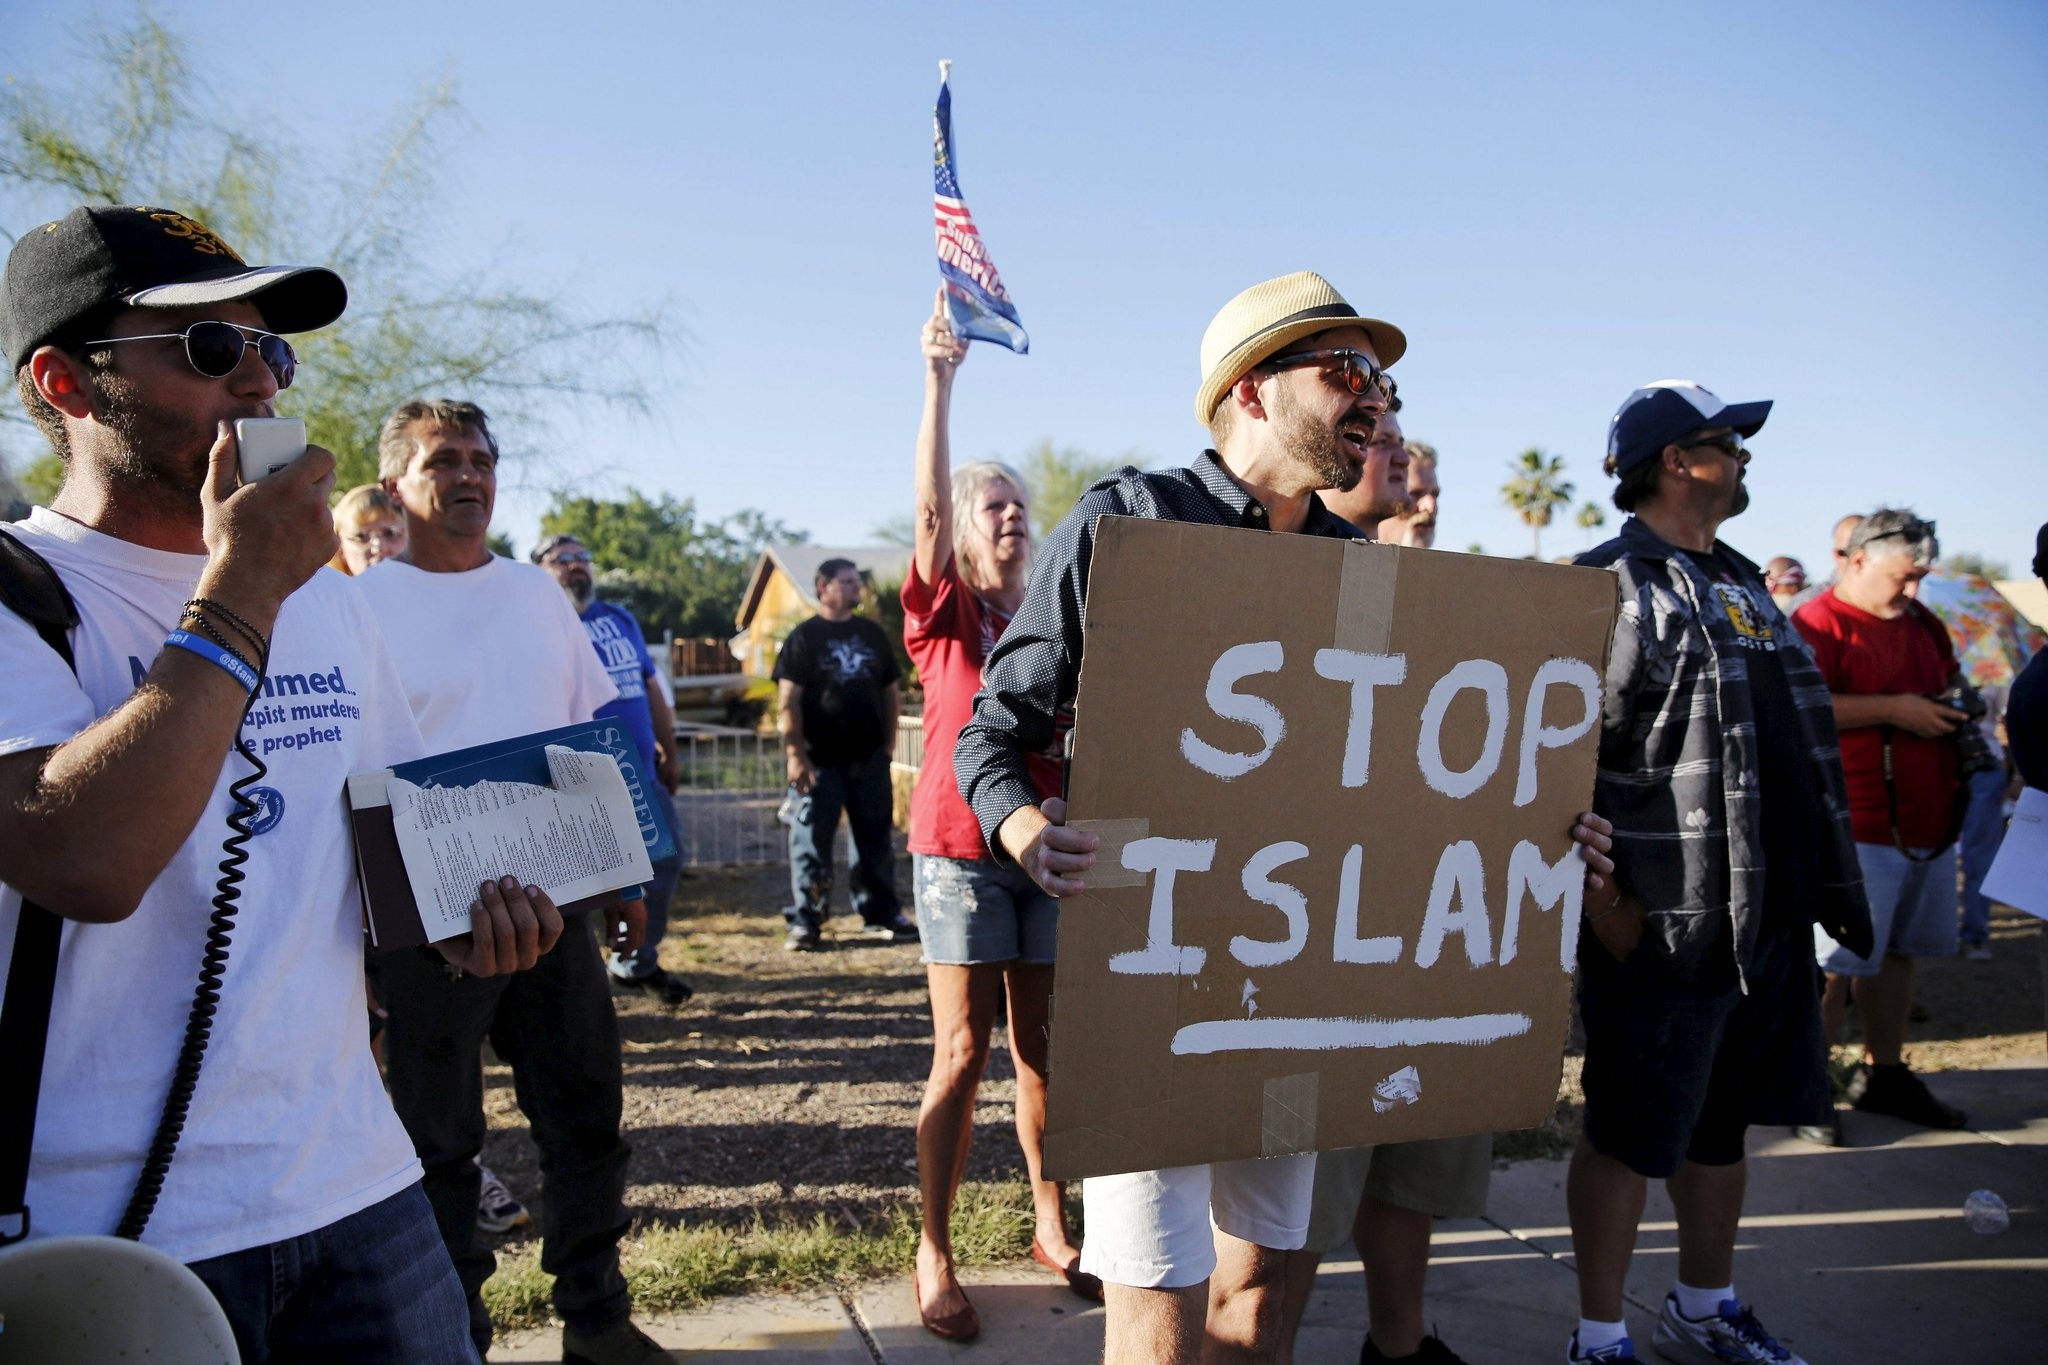 More than 200 protesters, some armed, outside a mosque in Arizona Phoenix, berating Islam and Prophet Muhammad (Peace Be Upon Him).